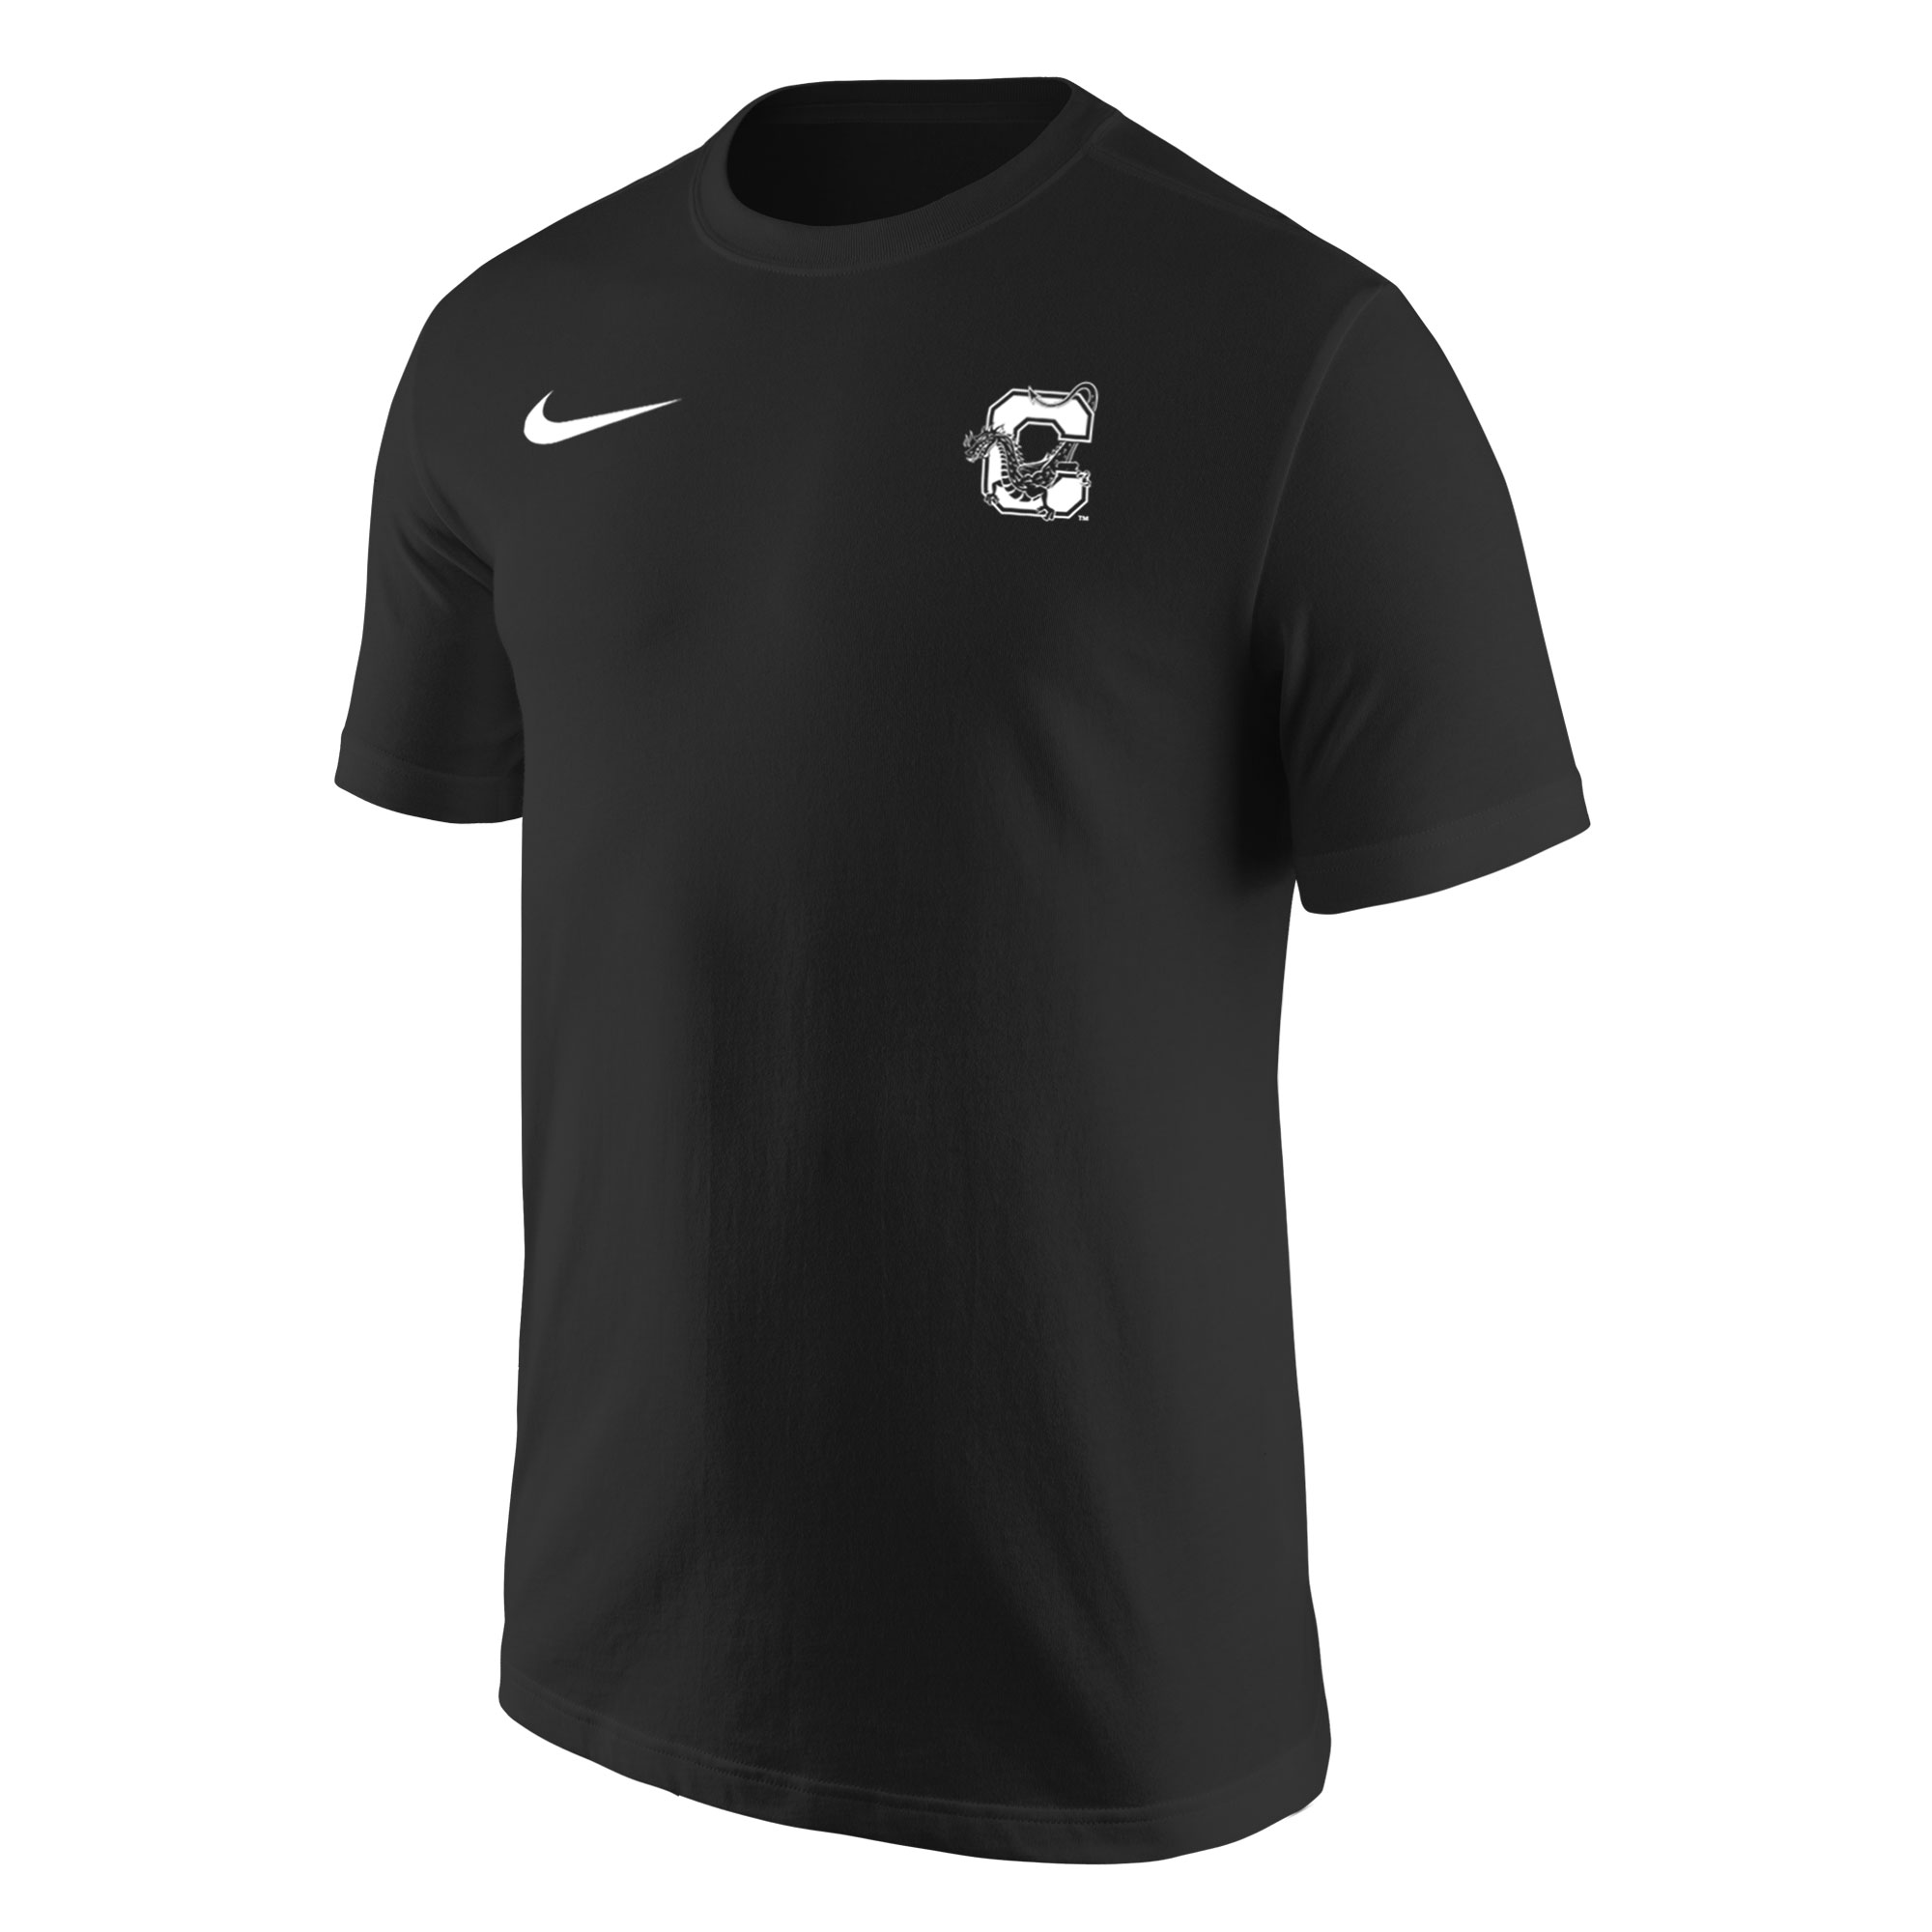 NIKE CORE COTTON C/DRAGON TEE | The Campus Store